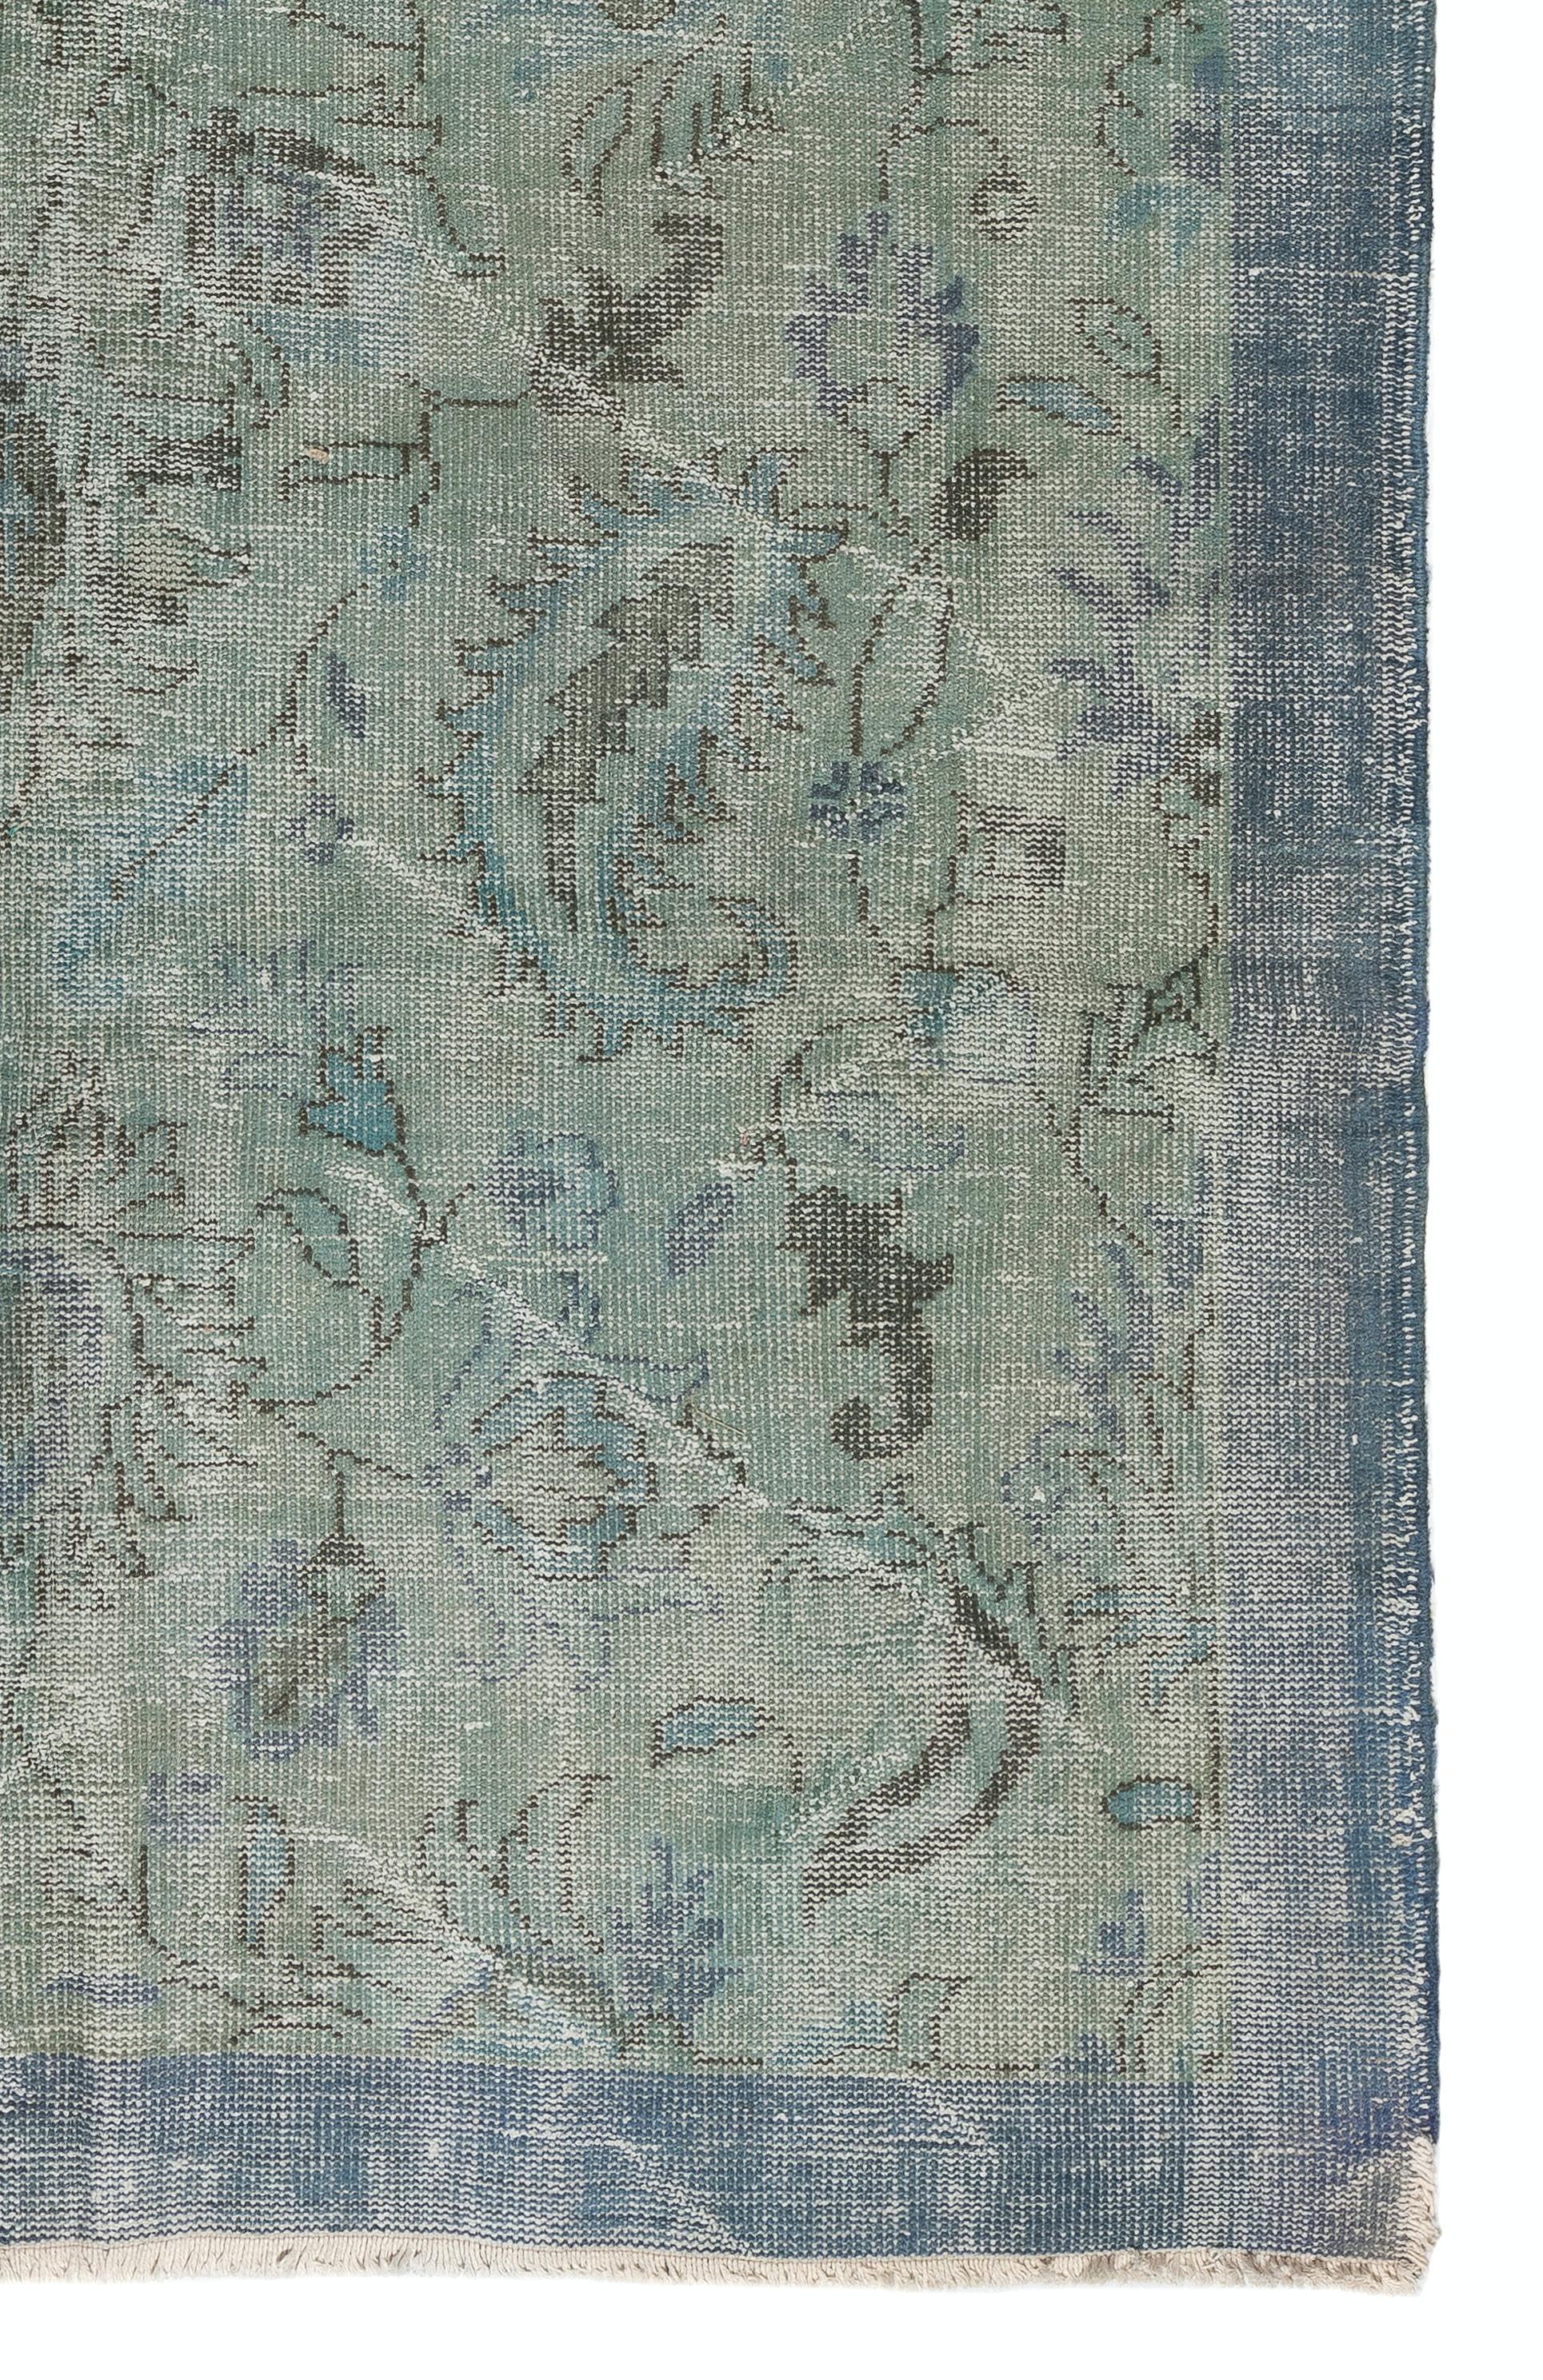 Hand-Woven 6x9.5 Ft Distressed Vintage Floral Anatolian Area Rug Over-Dyed in Blue Color